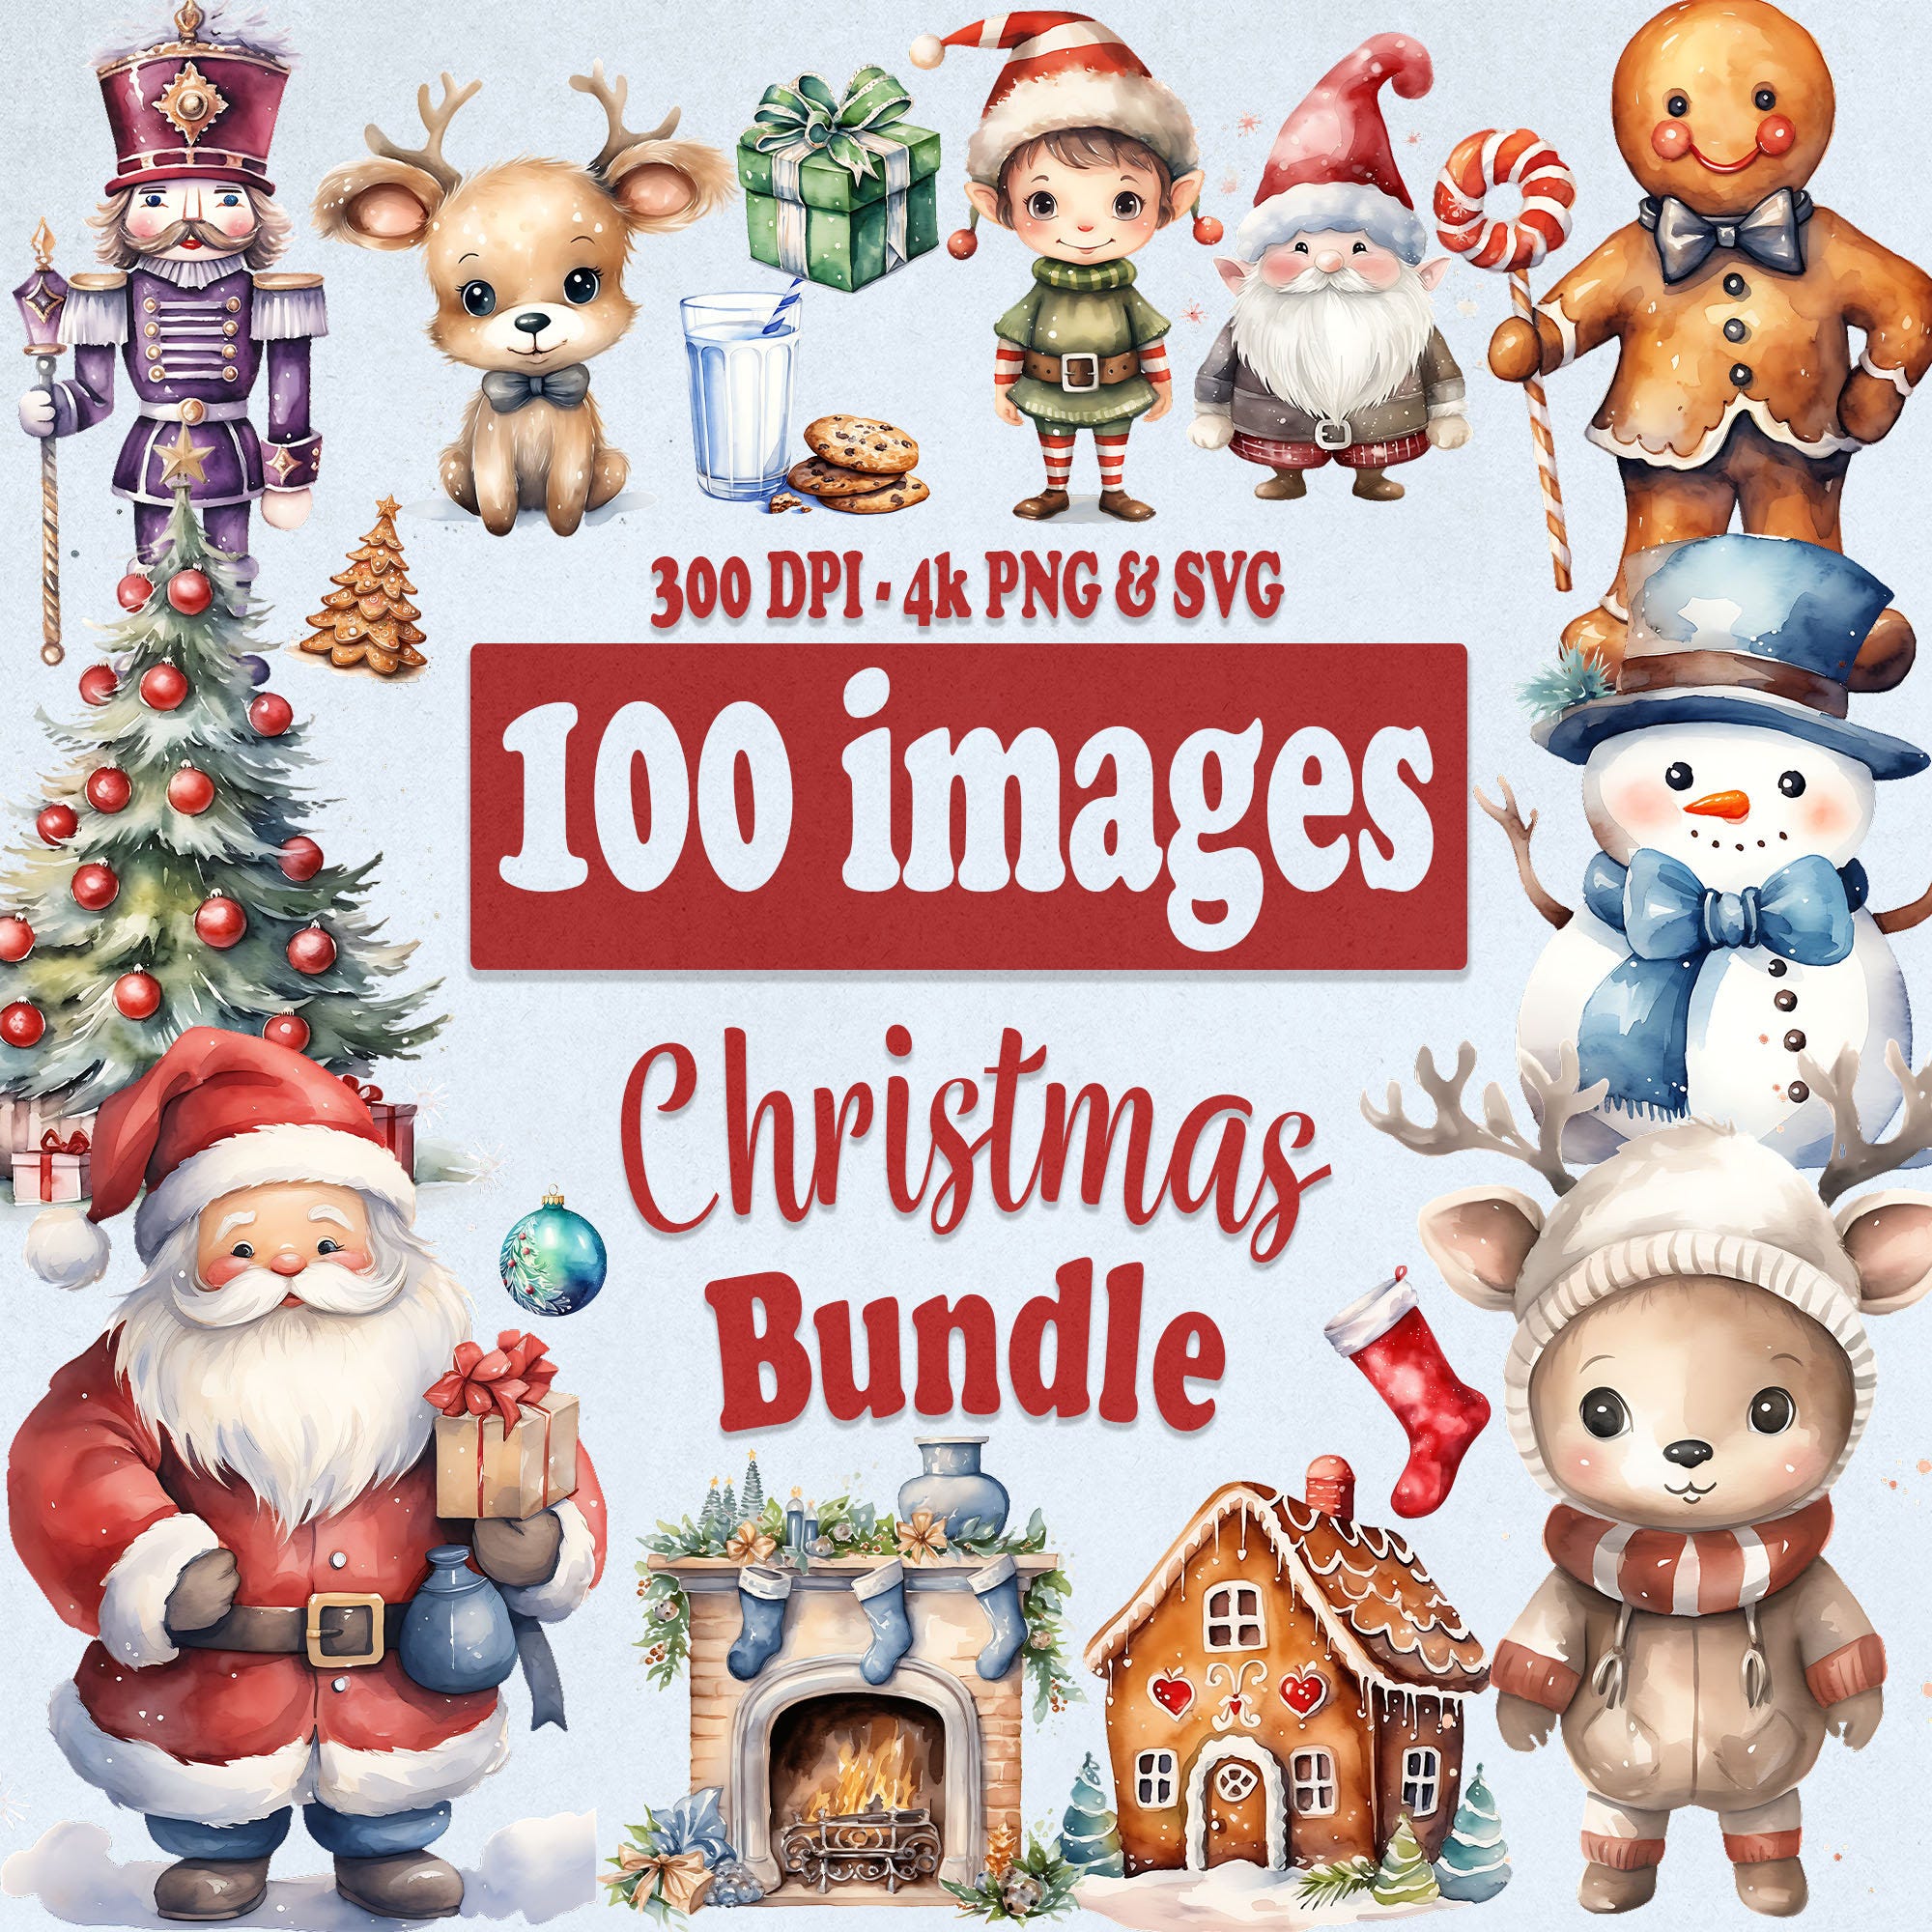 Watercolor Christmas Clipart Bundle, PNG & SVG XMAS Graphics, Cute Santa Claus Reindeer Tree Snowman for commercial use Instant Download